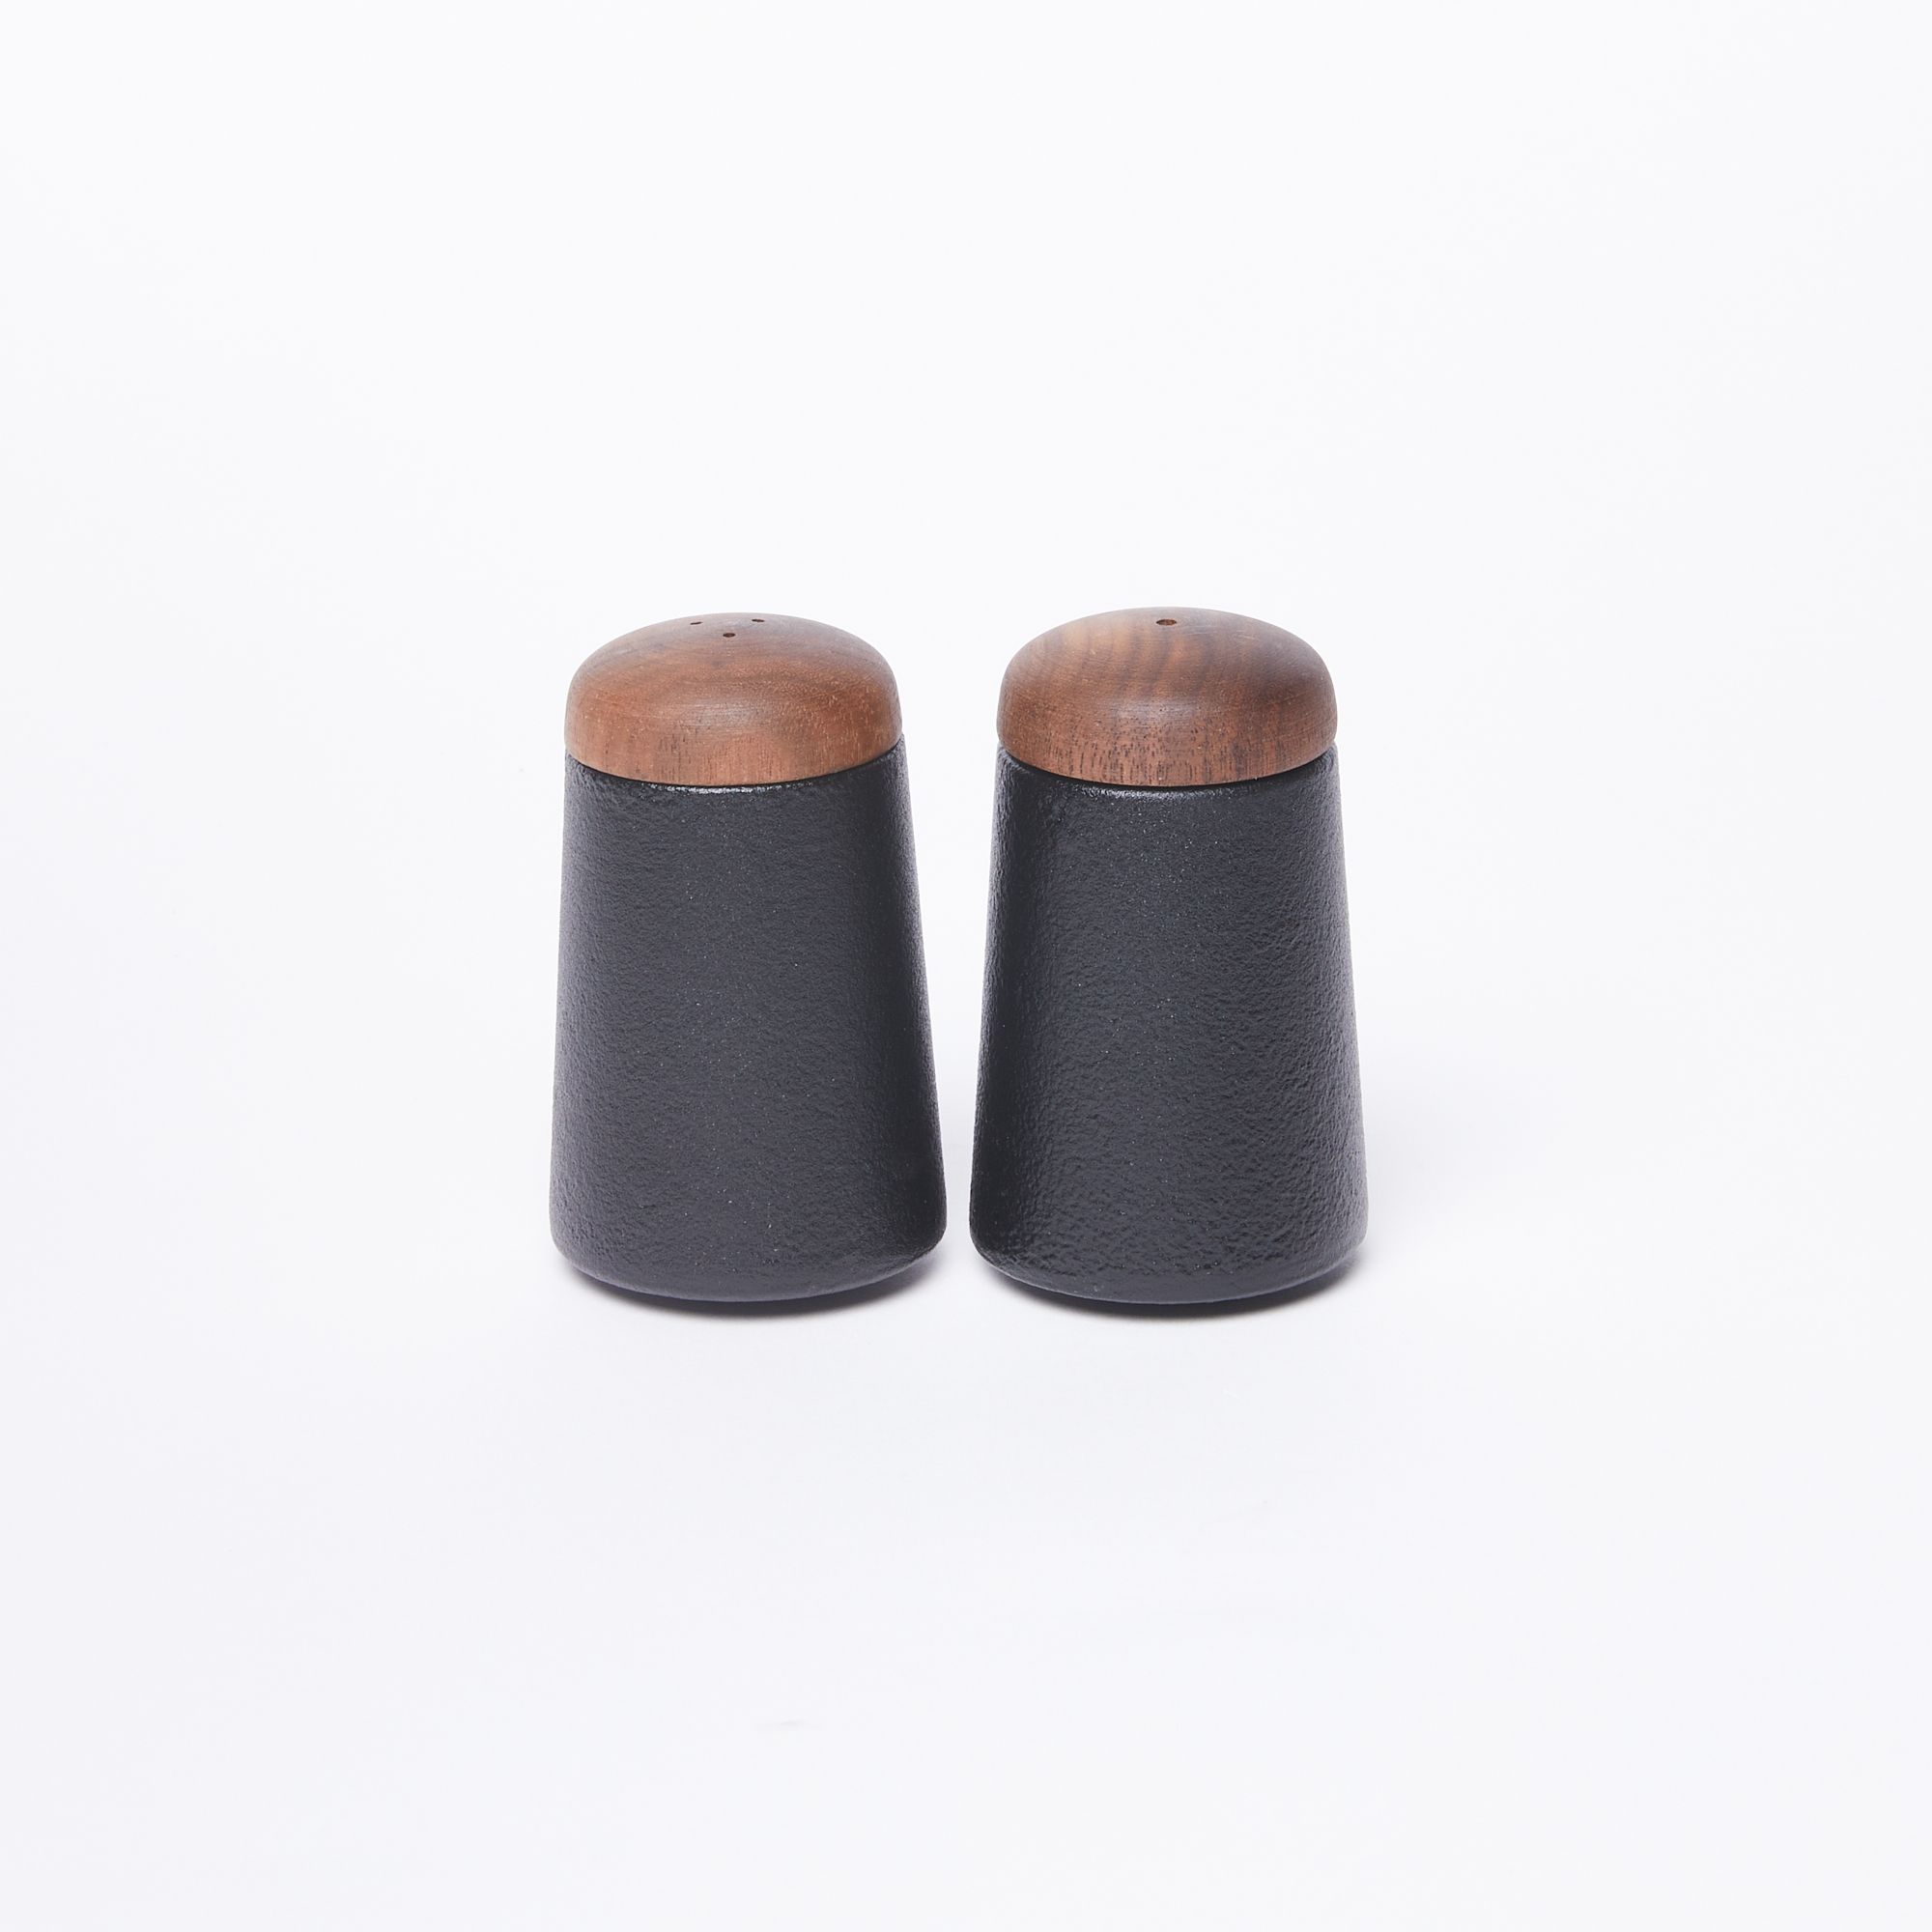 A set of salt and pepper shakers with a black cast iron base with a rounded walnut wood top on a white background